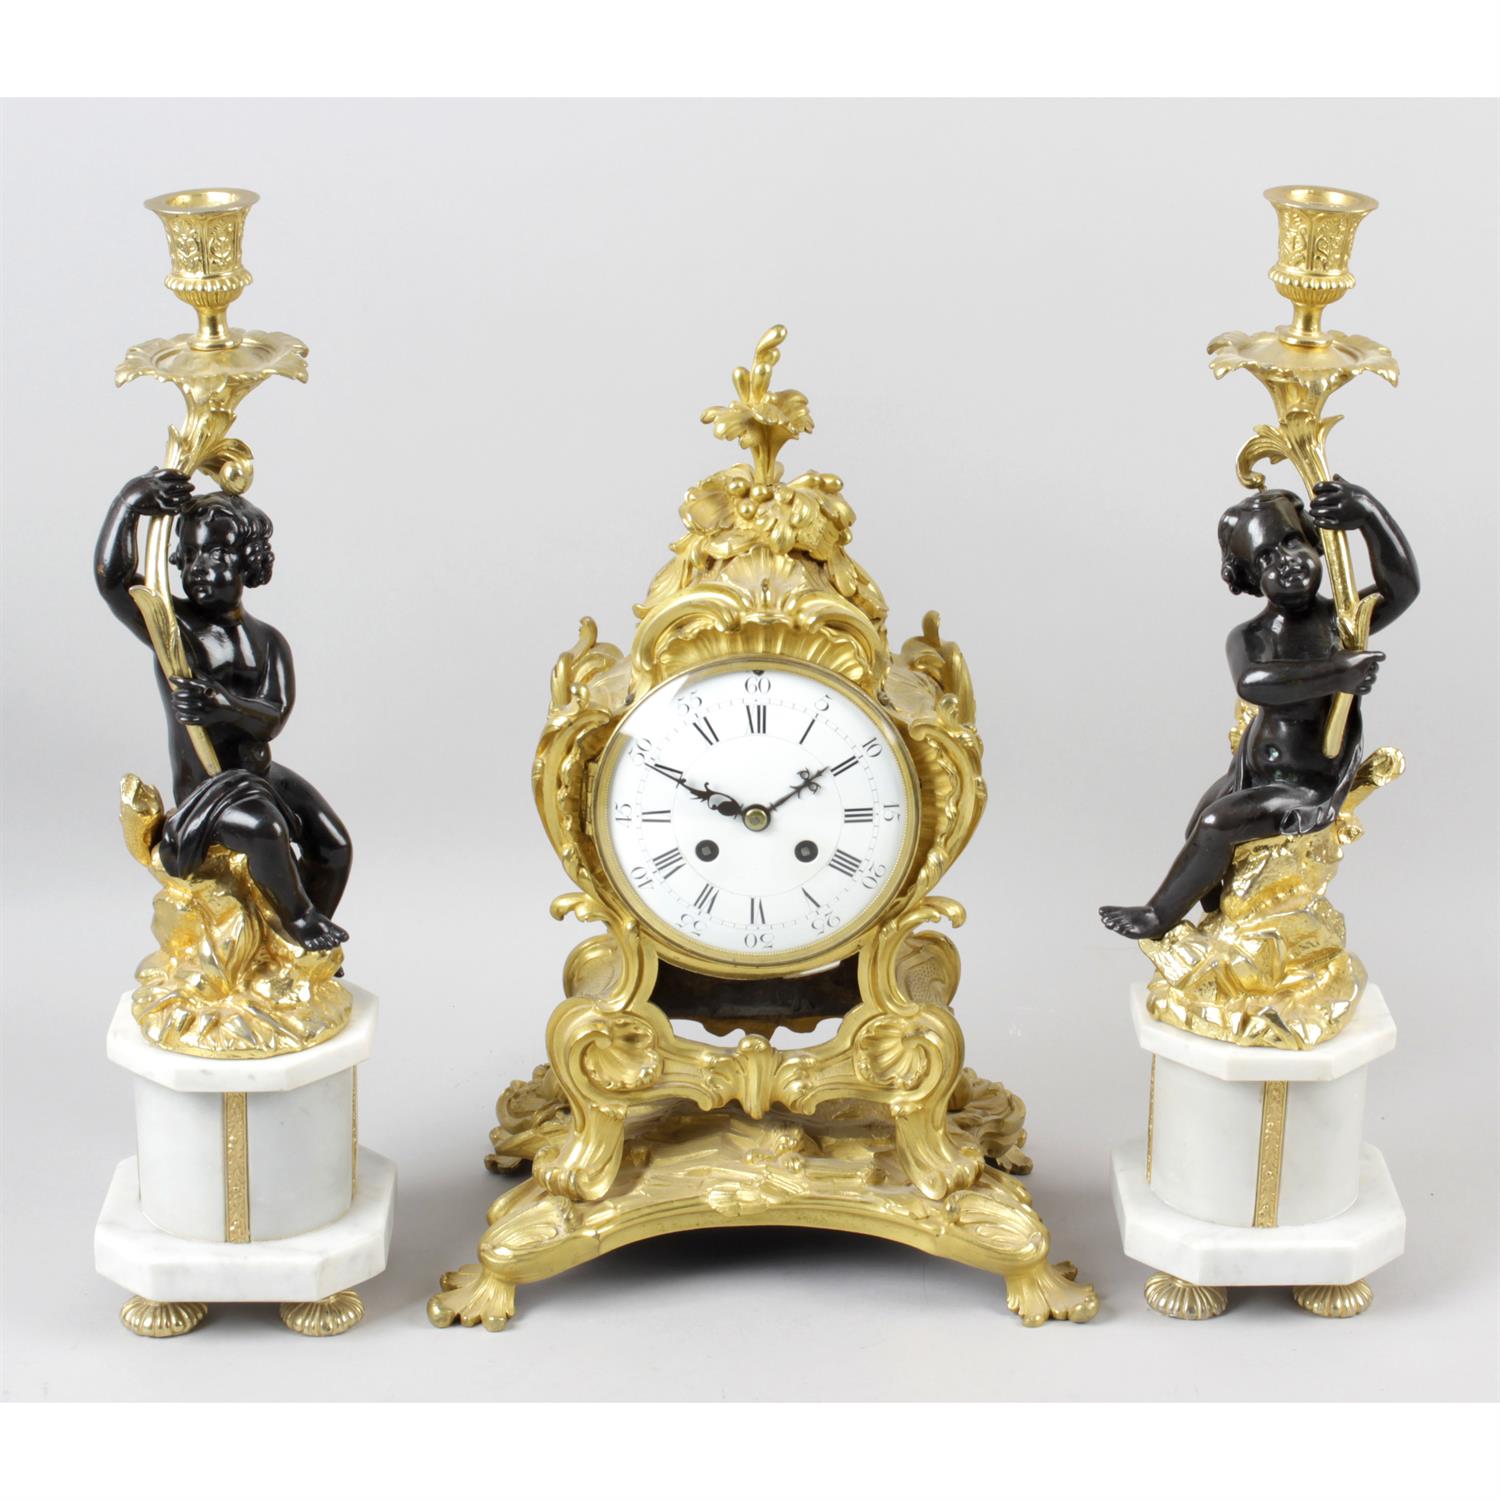 A 19th century gilt bronze cased mantel clock, together with a pair of bronze and gilt metal candle